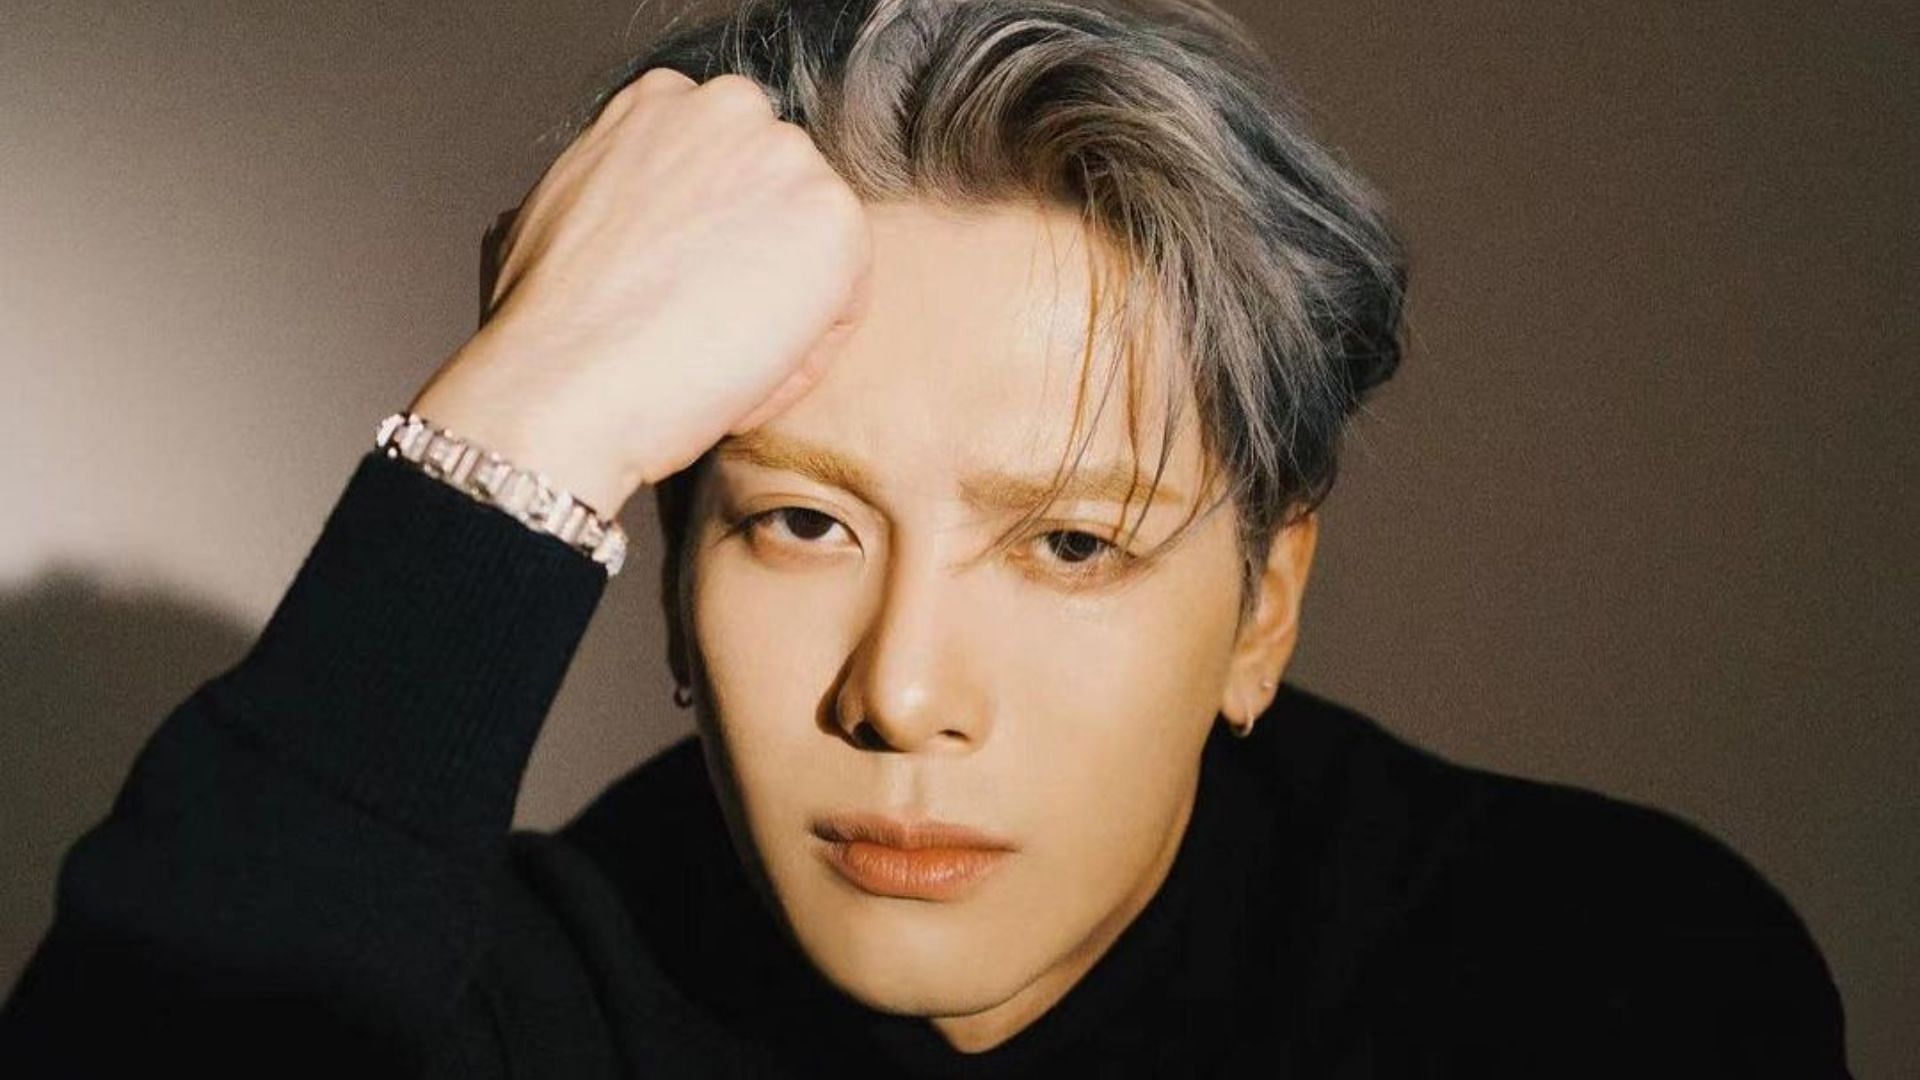 GOT7's Jackson Wang Shows His True Personality After Receiving A